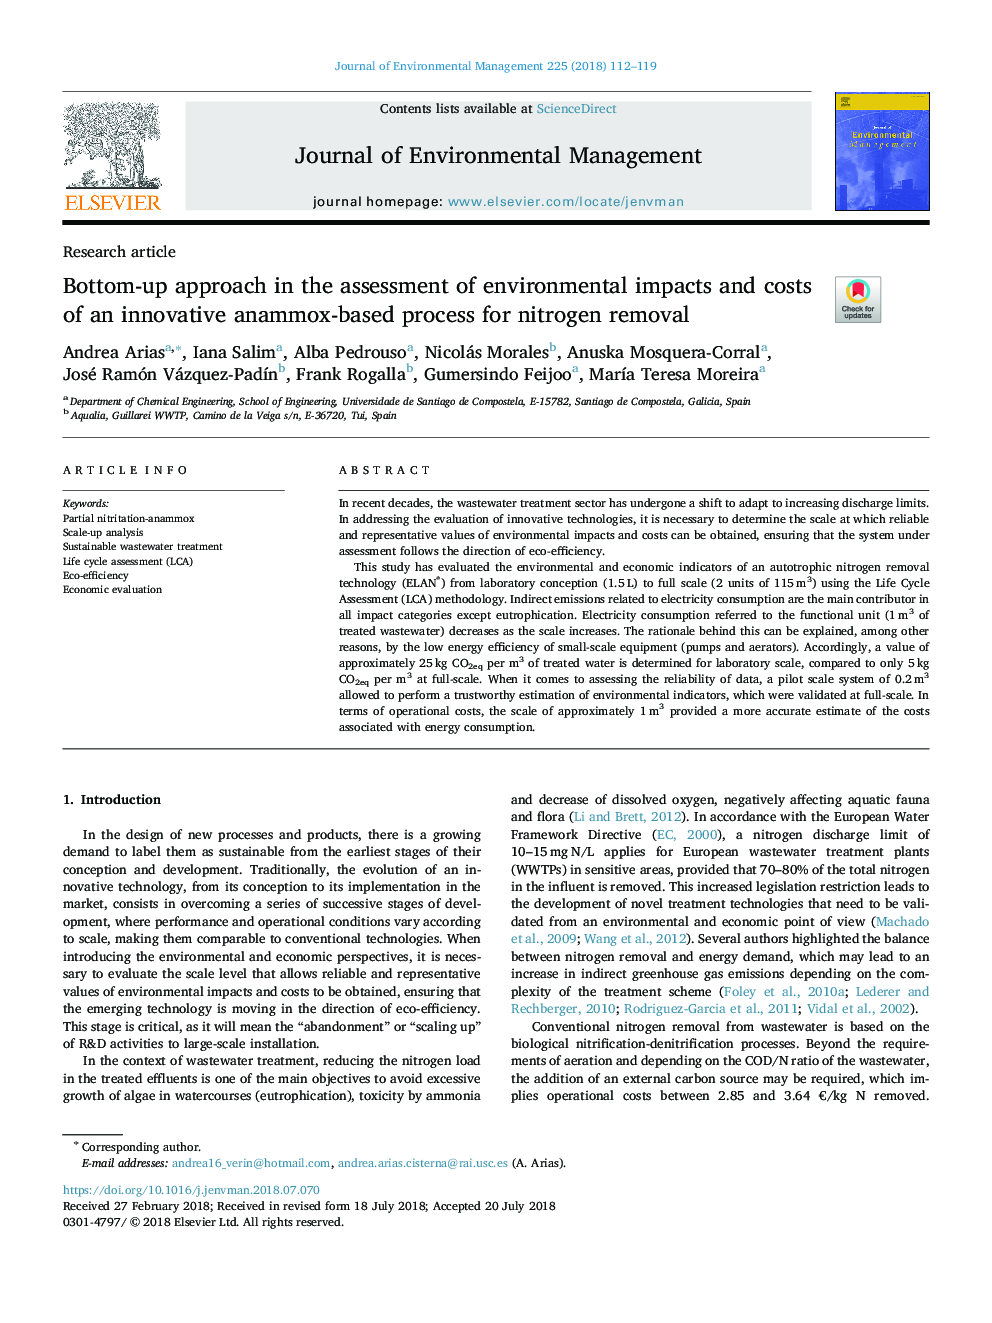 Bottom-up approach in the assessment of environmental impacts and costs of an innovative anammox-based process for nitrogen removal